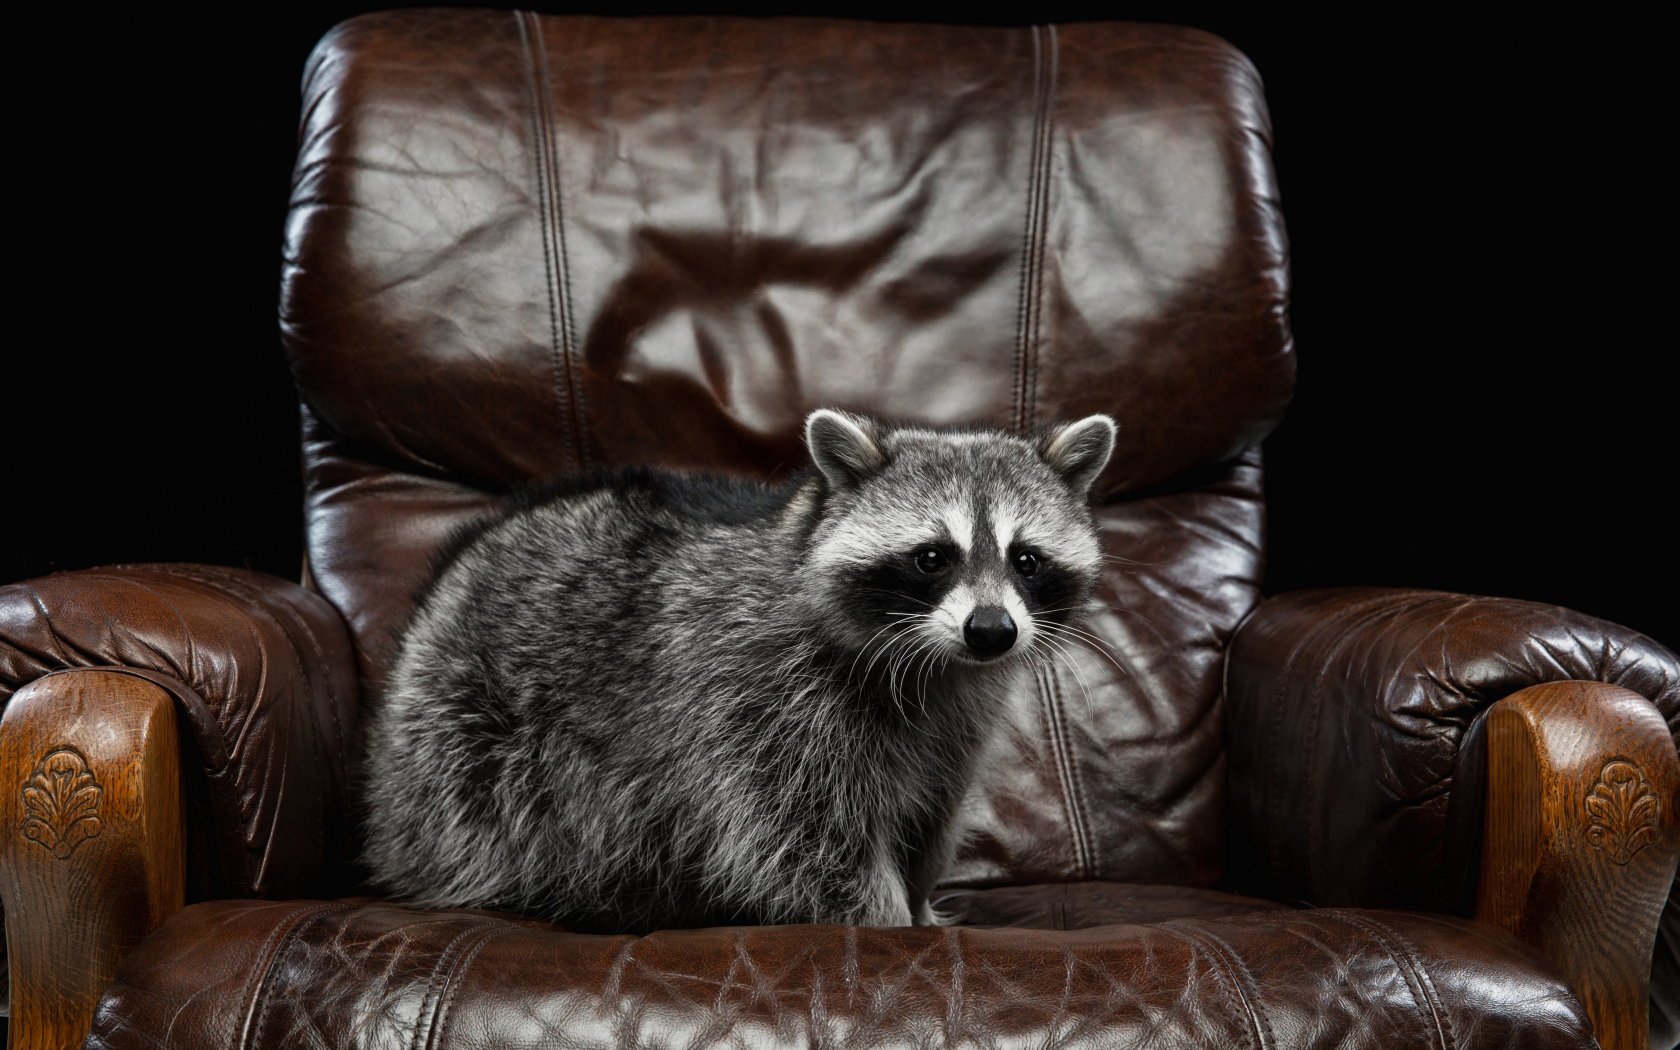 Big gray raccoon on a leather chair